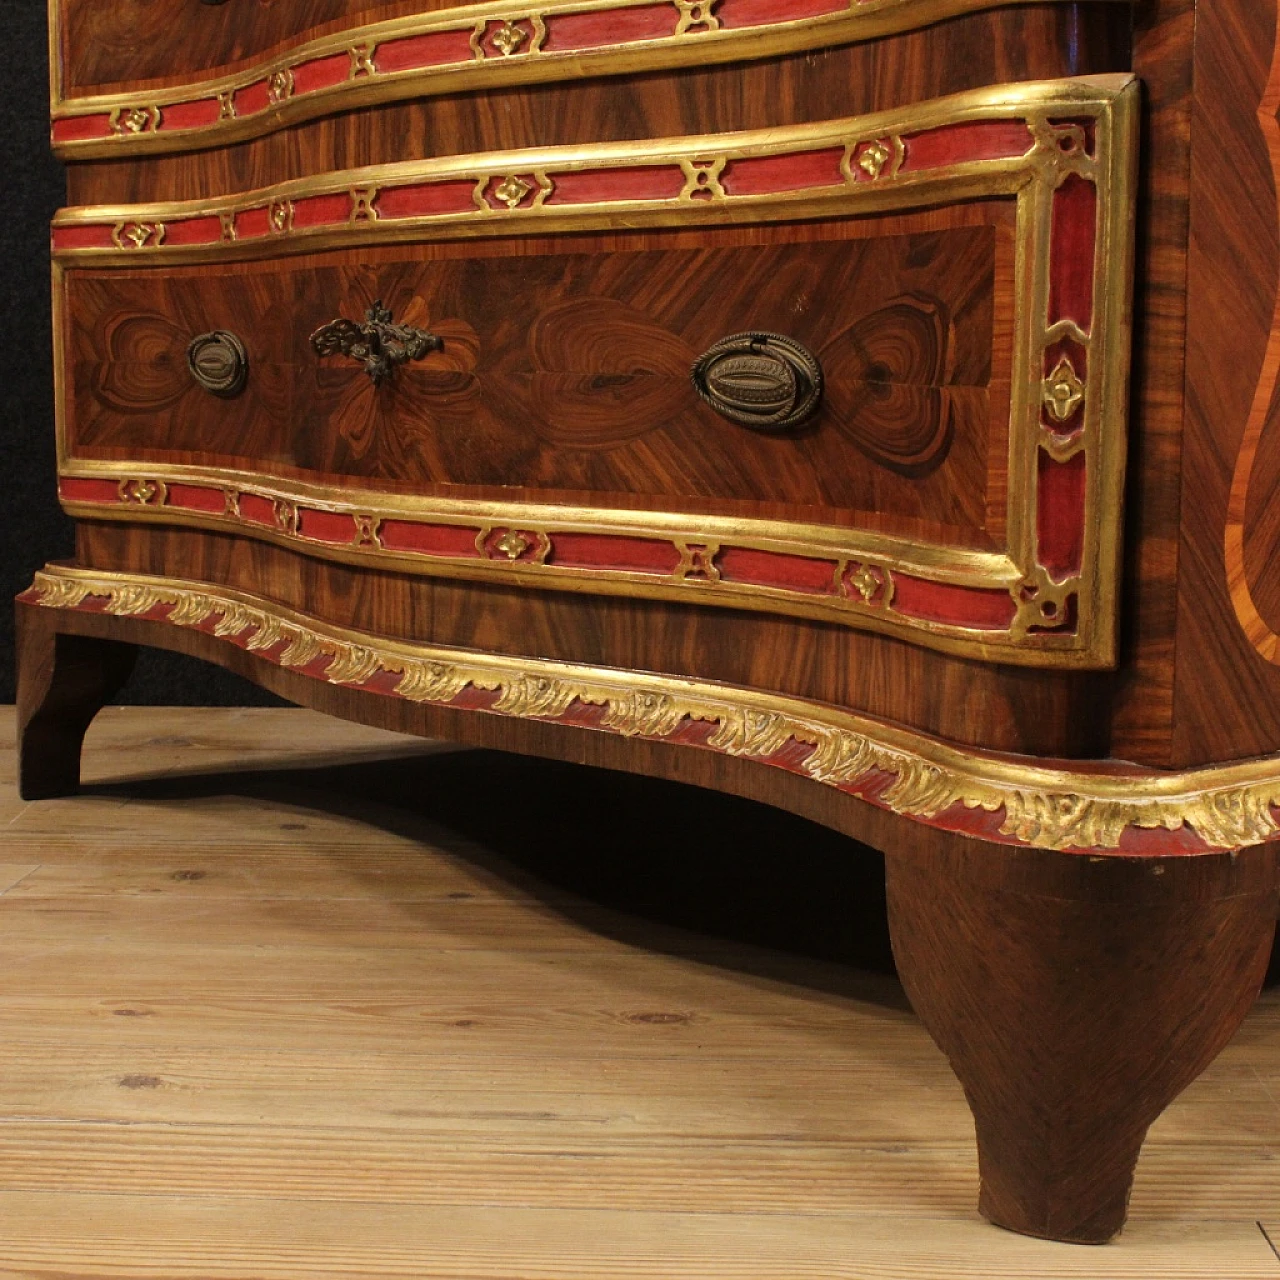 Genoese inlaid, lacquered and gilded wood dresser 14